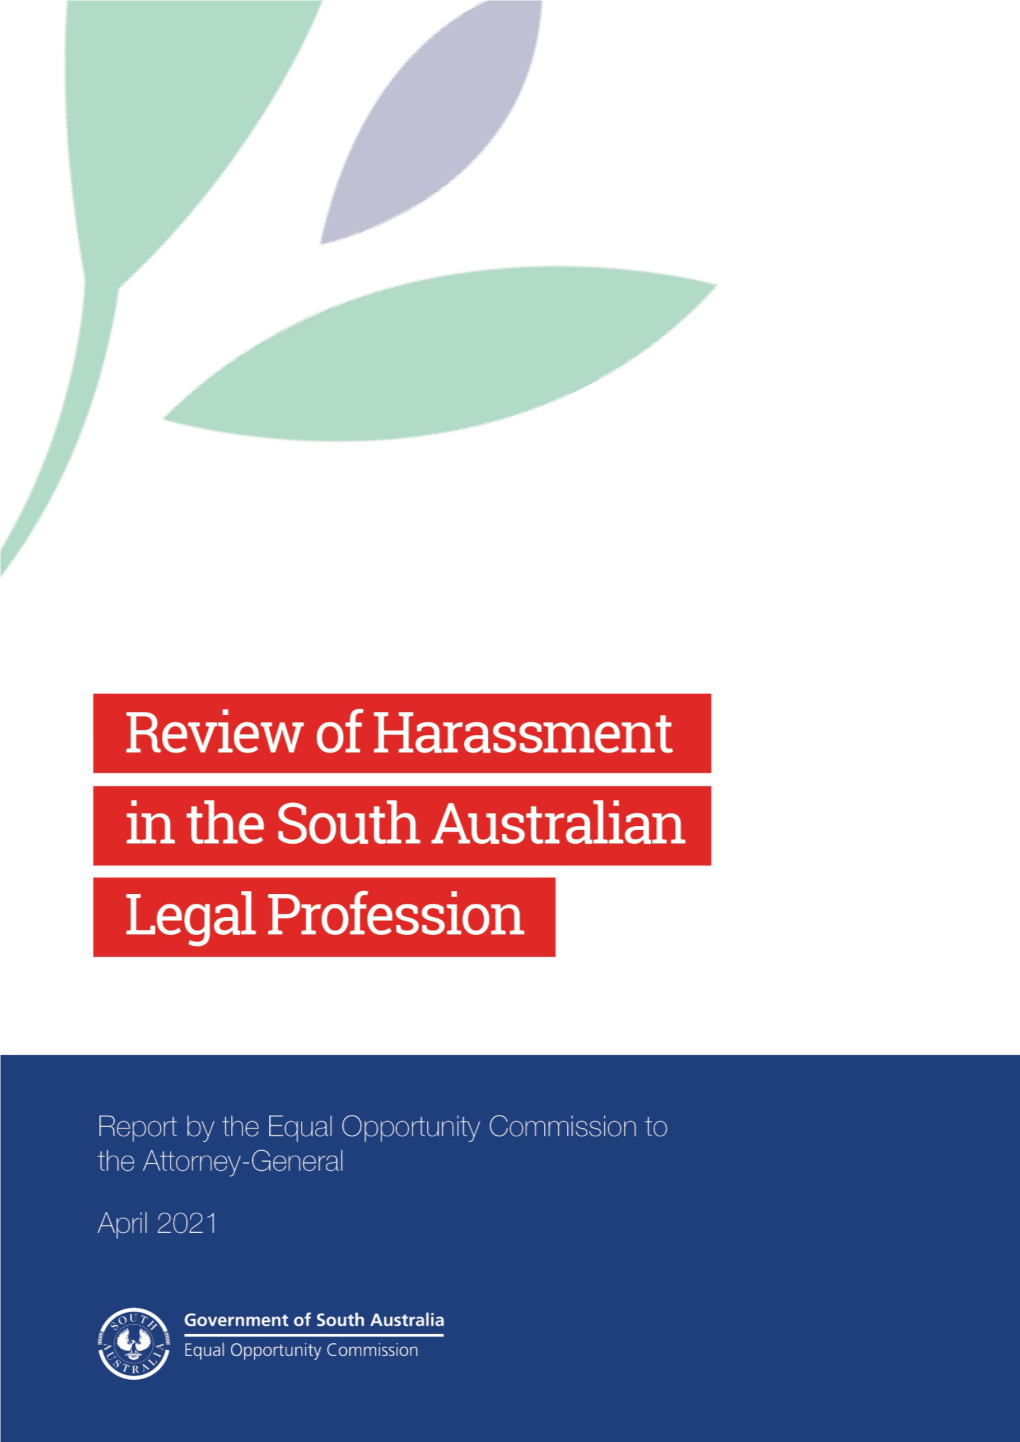 Report of the Review of Harassment in the South